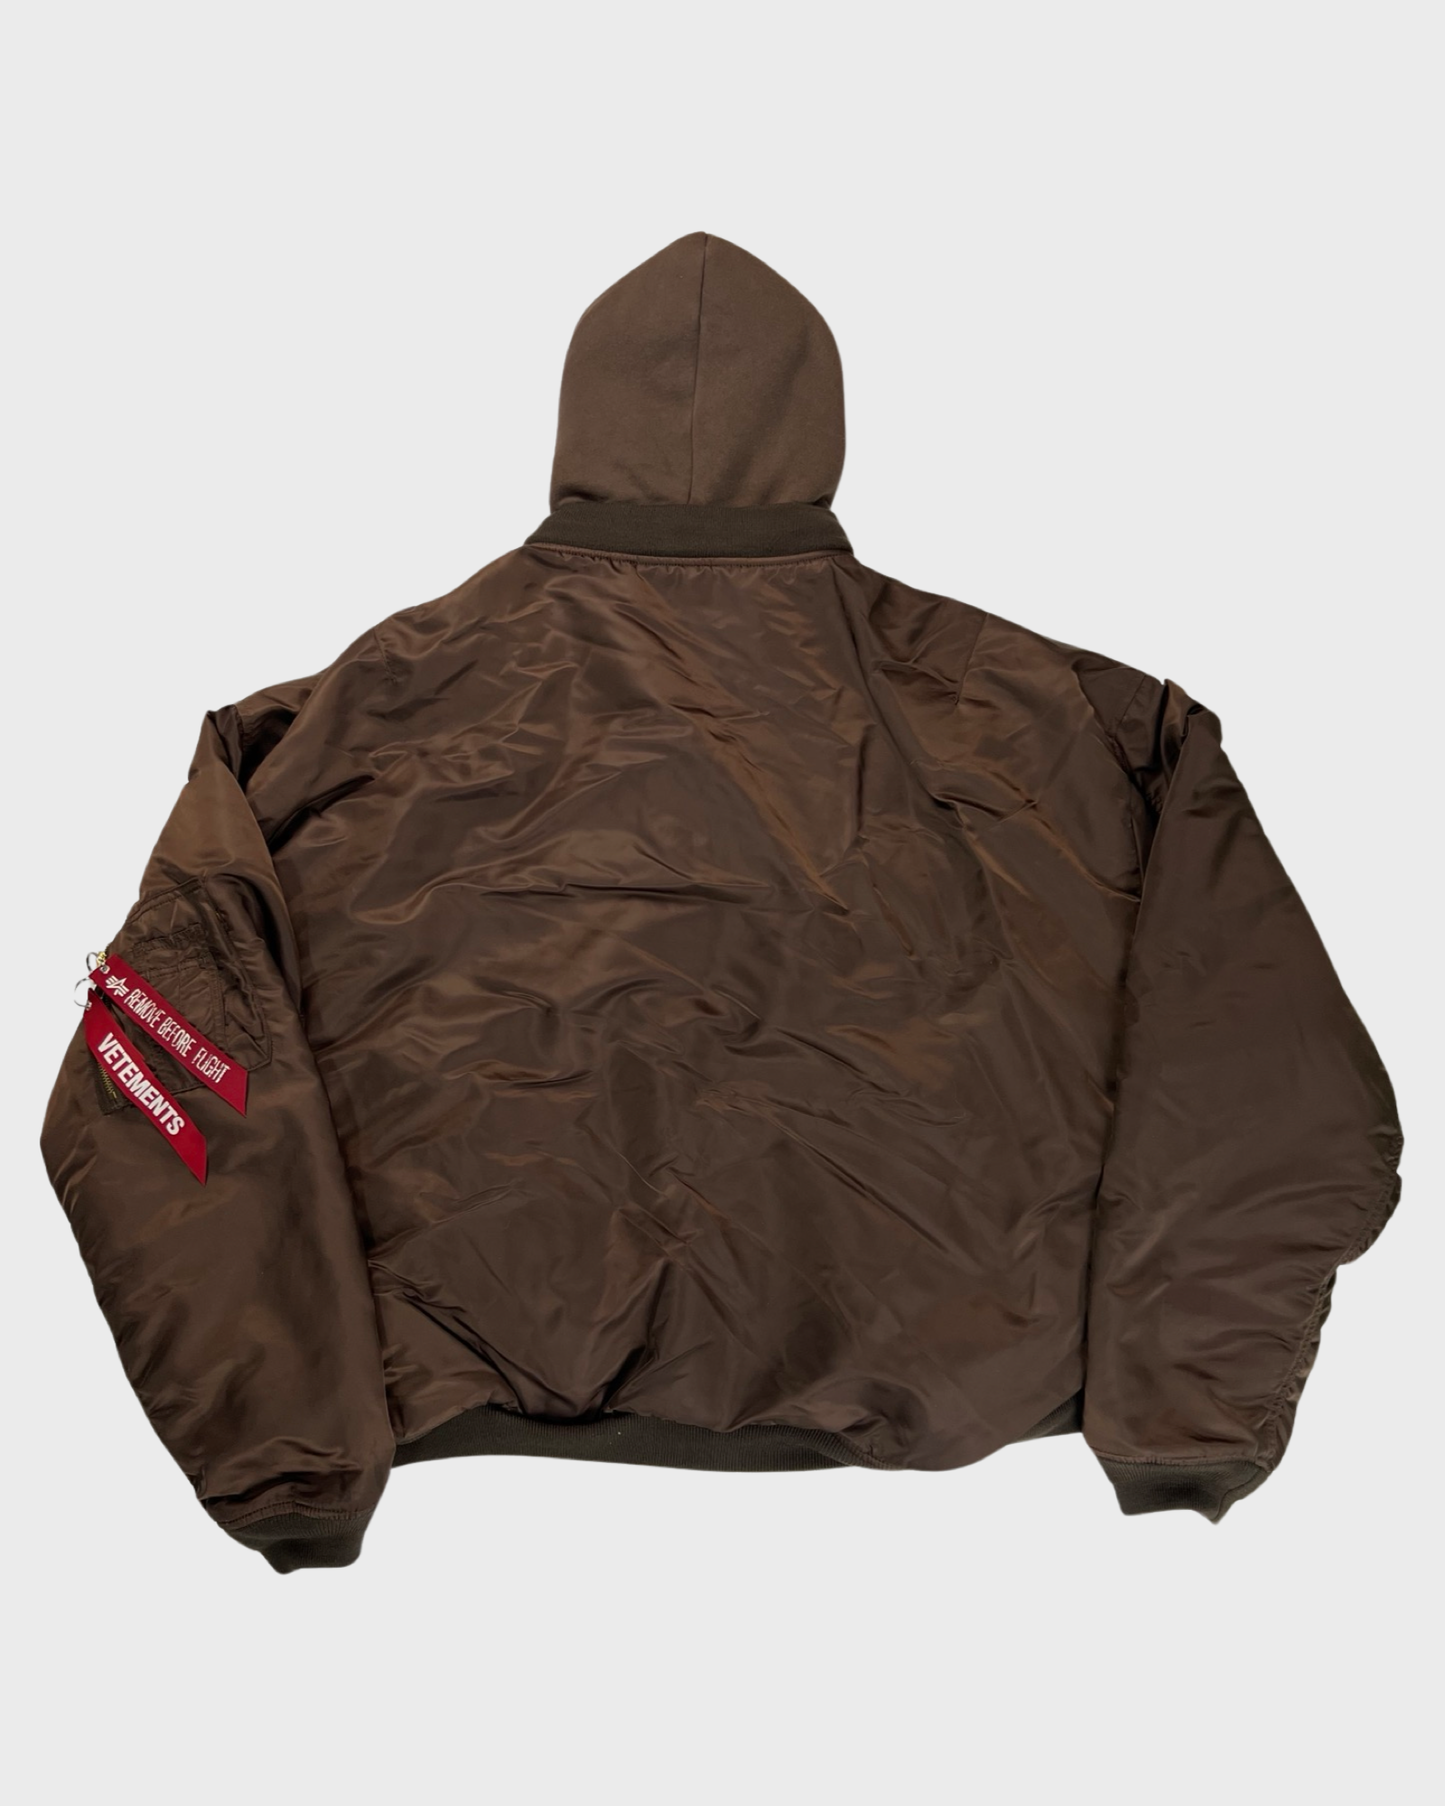 Vetements SS17 runway reversible foldable MA1 Bomber Jacket in brown & wine red SZ:S